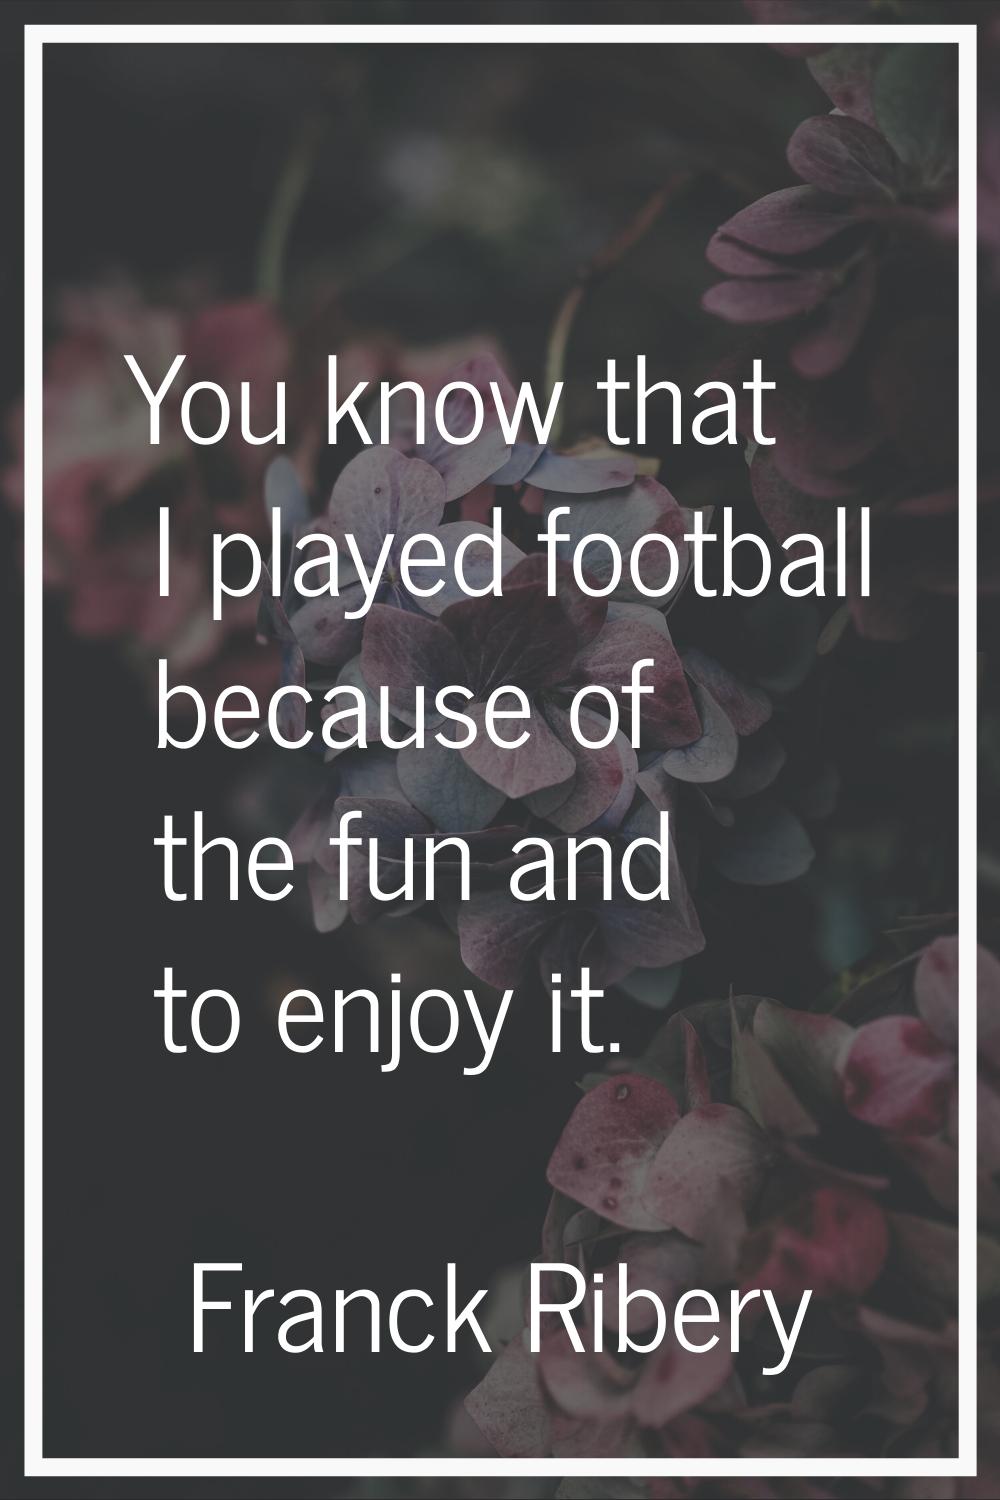 You know that I played football because of the fun and to enjoy it.